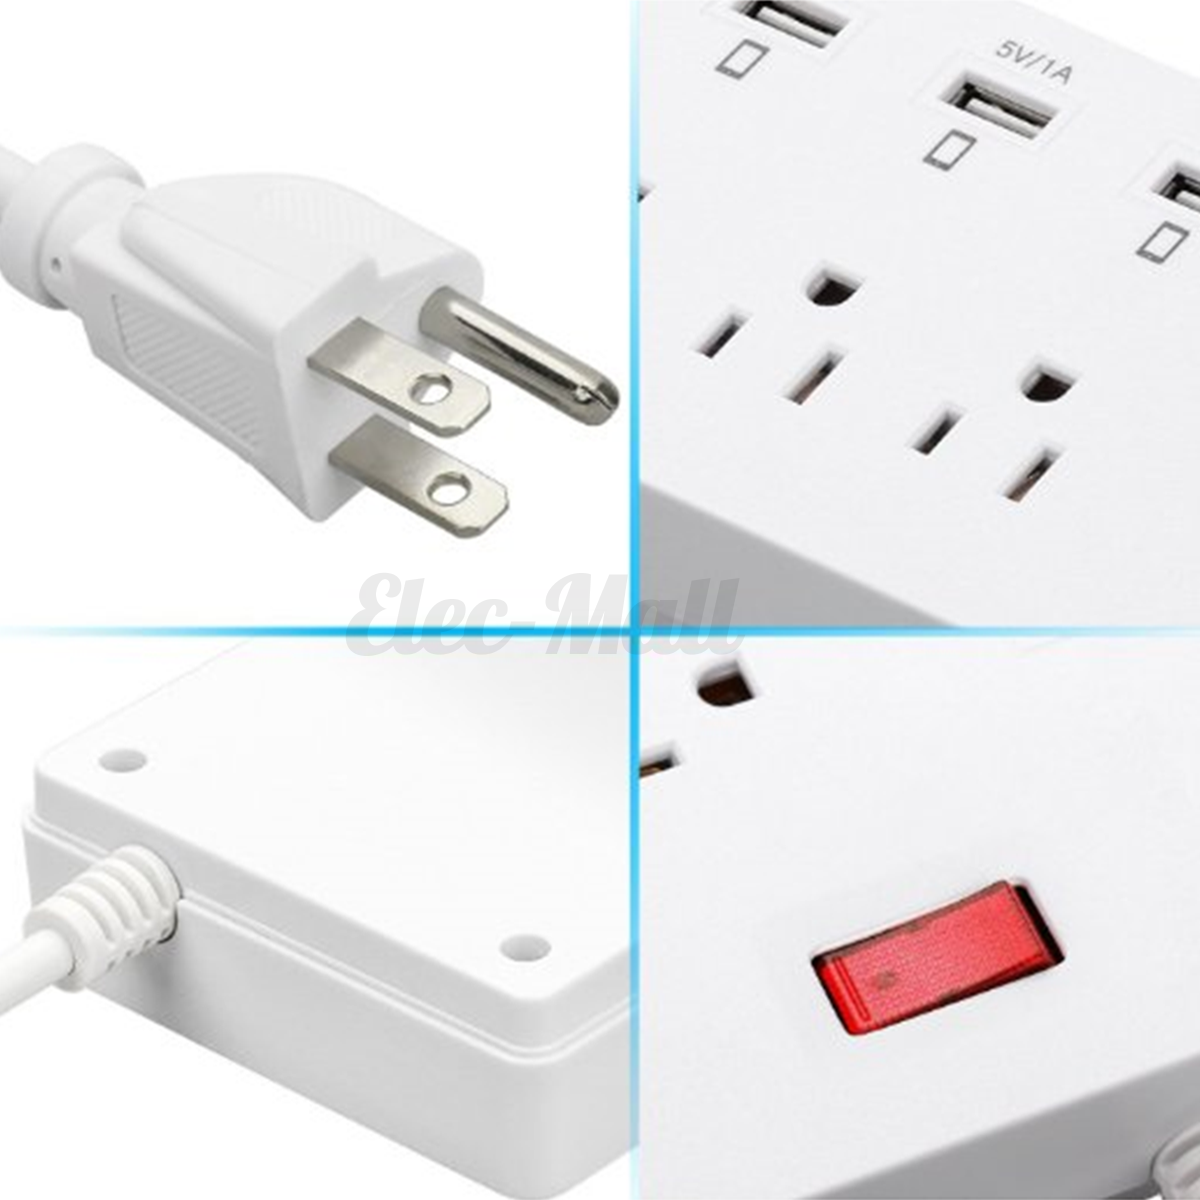 5V 2.4A / 5V 1A 6 Outlet 6 USB Charging Port Power Strip with Surge Protector